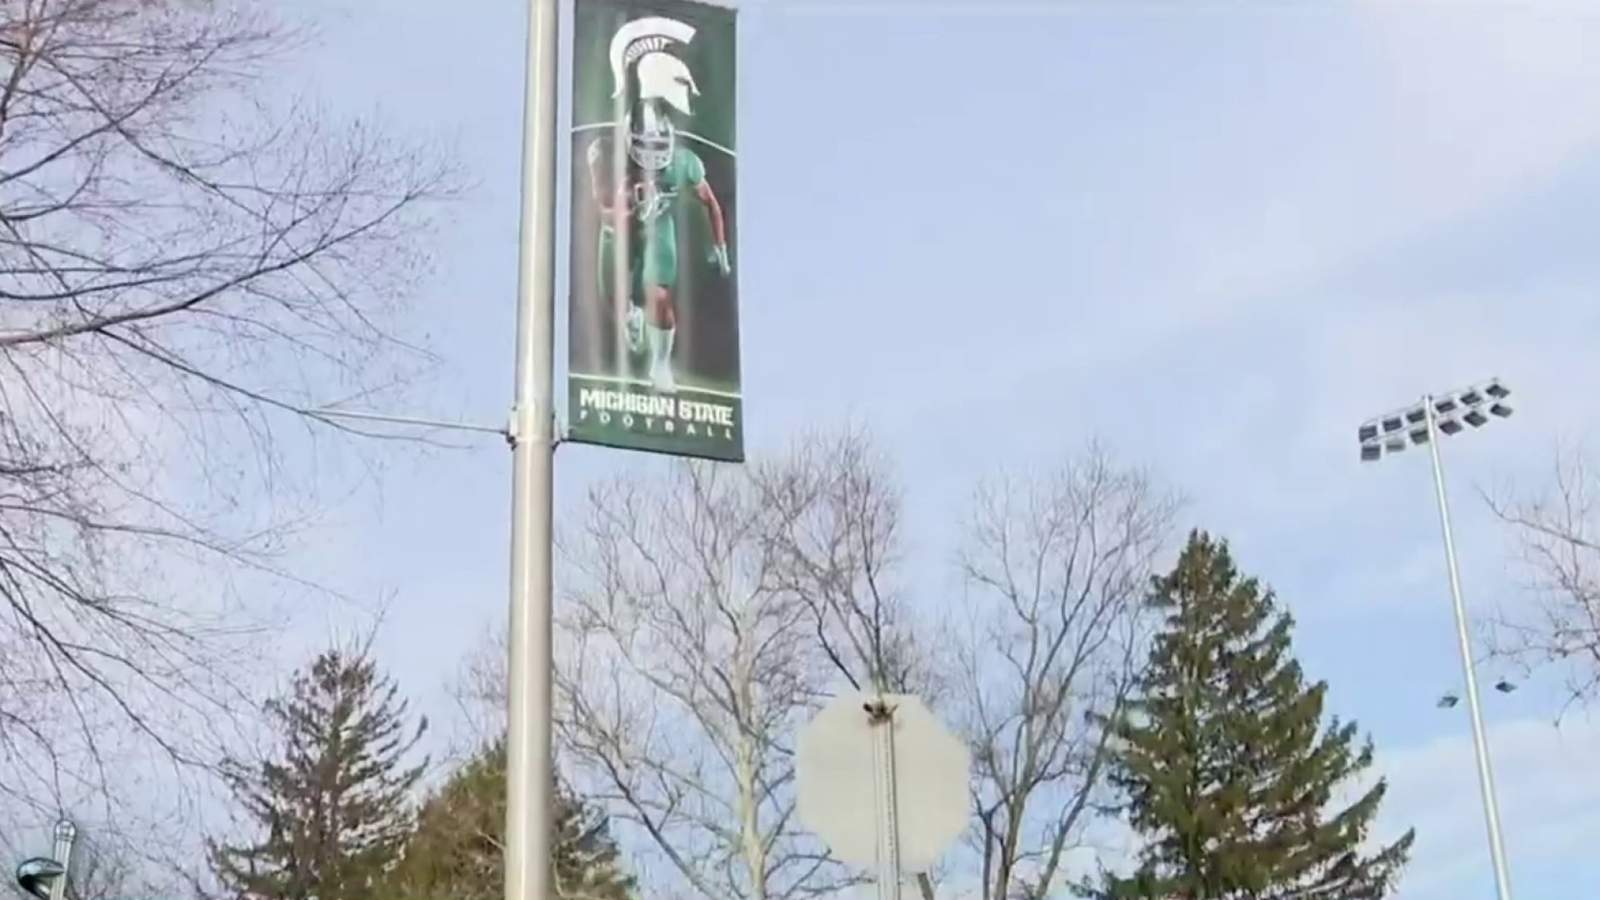 Michigan State students react to news that classes will be online-only amid coronavirus concerns